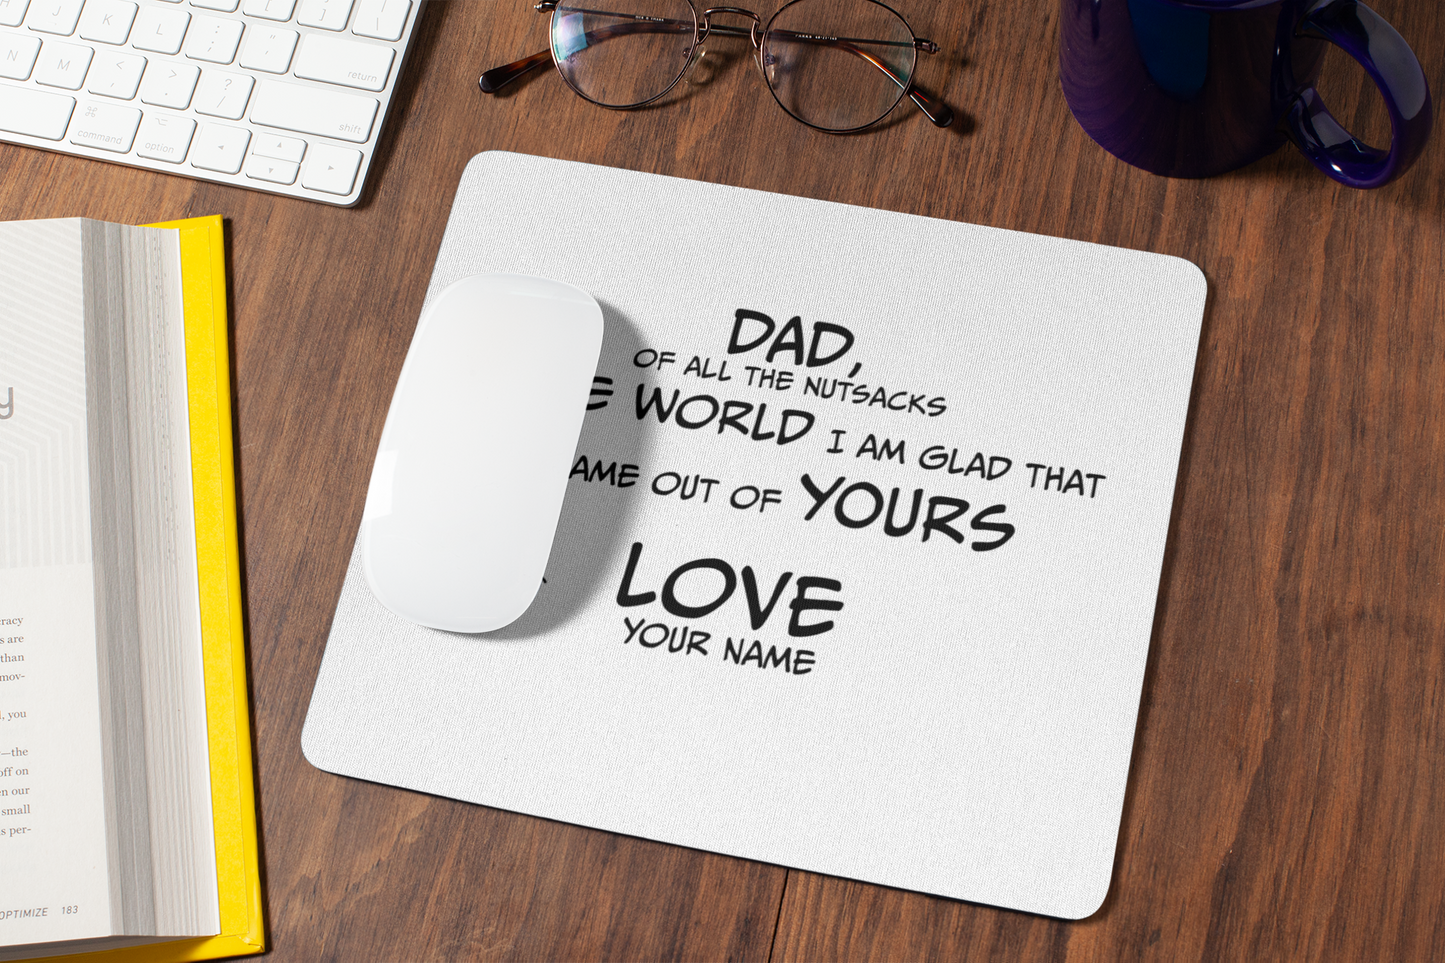 Dad, of all the nutsacks in the world, I am glad that I came out of yours Mouse pad ball sax ballsack ballsax dad dads day dads day gift Fahters day fathers fathers day funny mouse pad gift for dad gift for him mouse pad nut sack nut sax nutz super dad